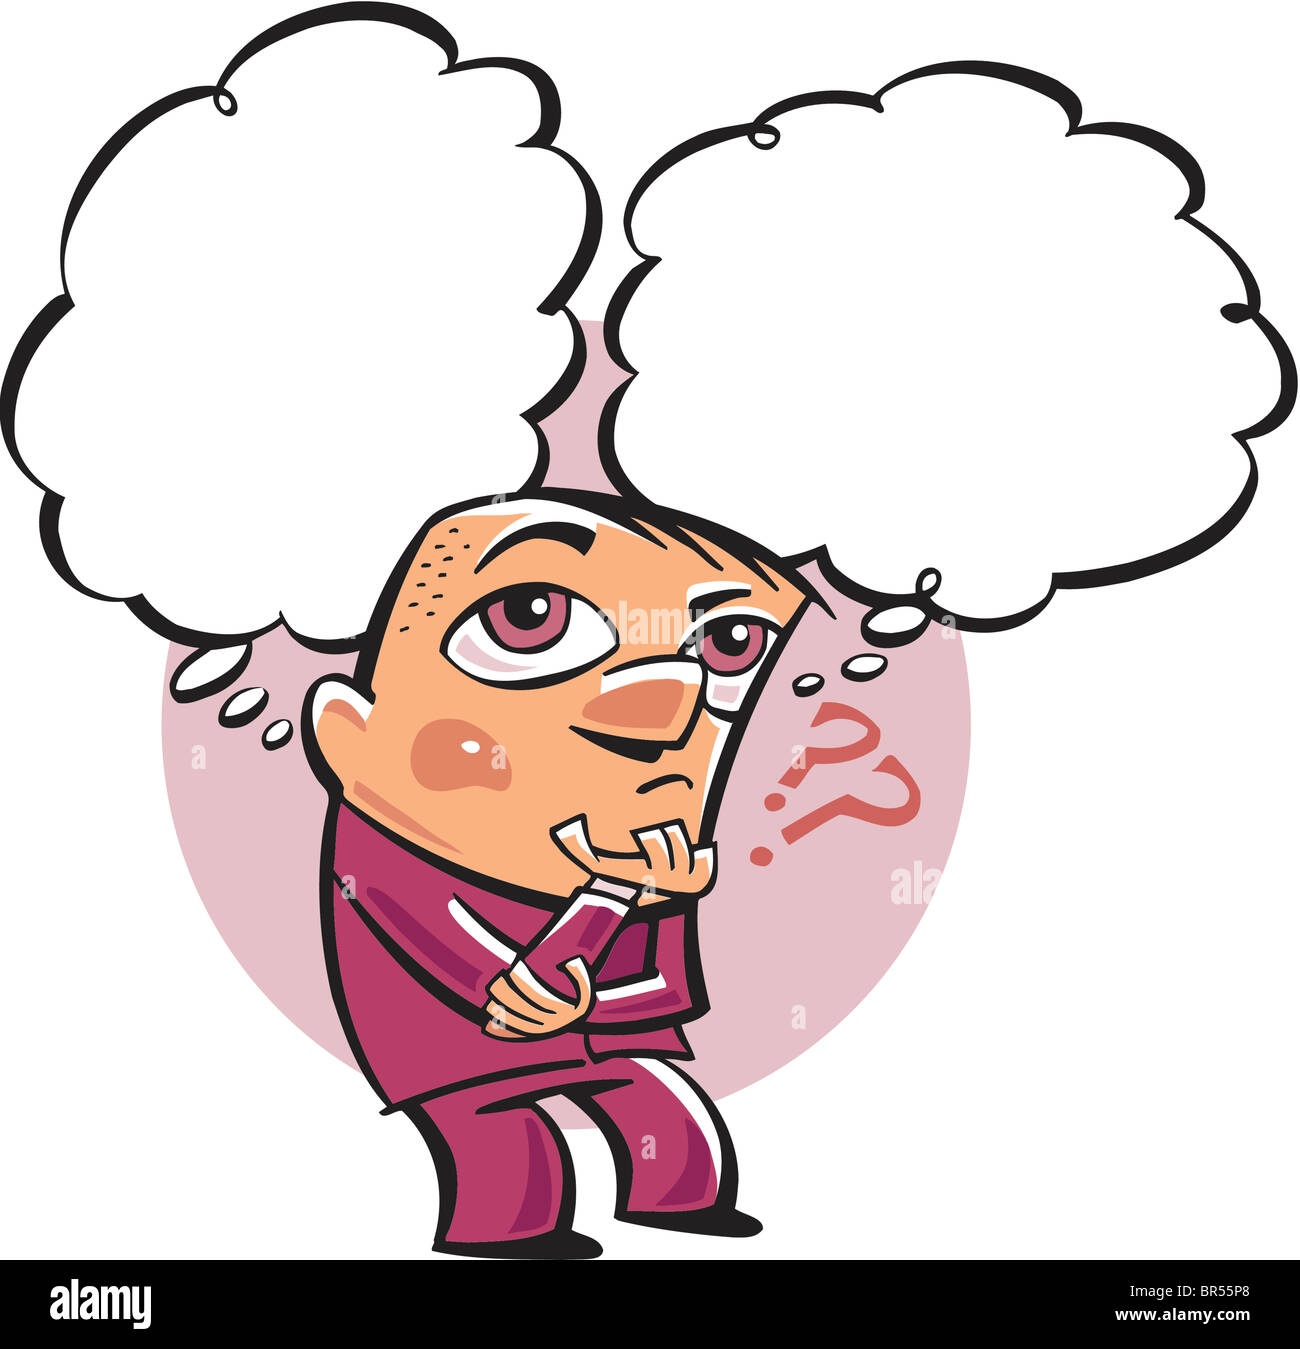 A cartoon drawing of a man thinking Stock Photo - Alamy